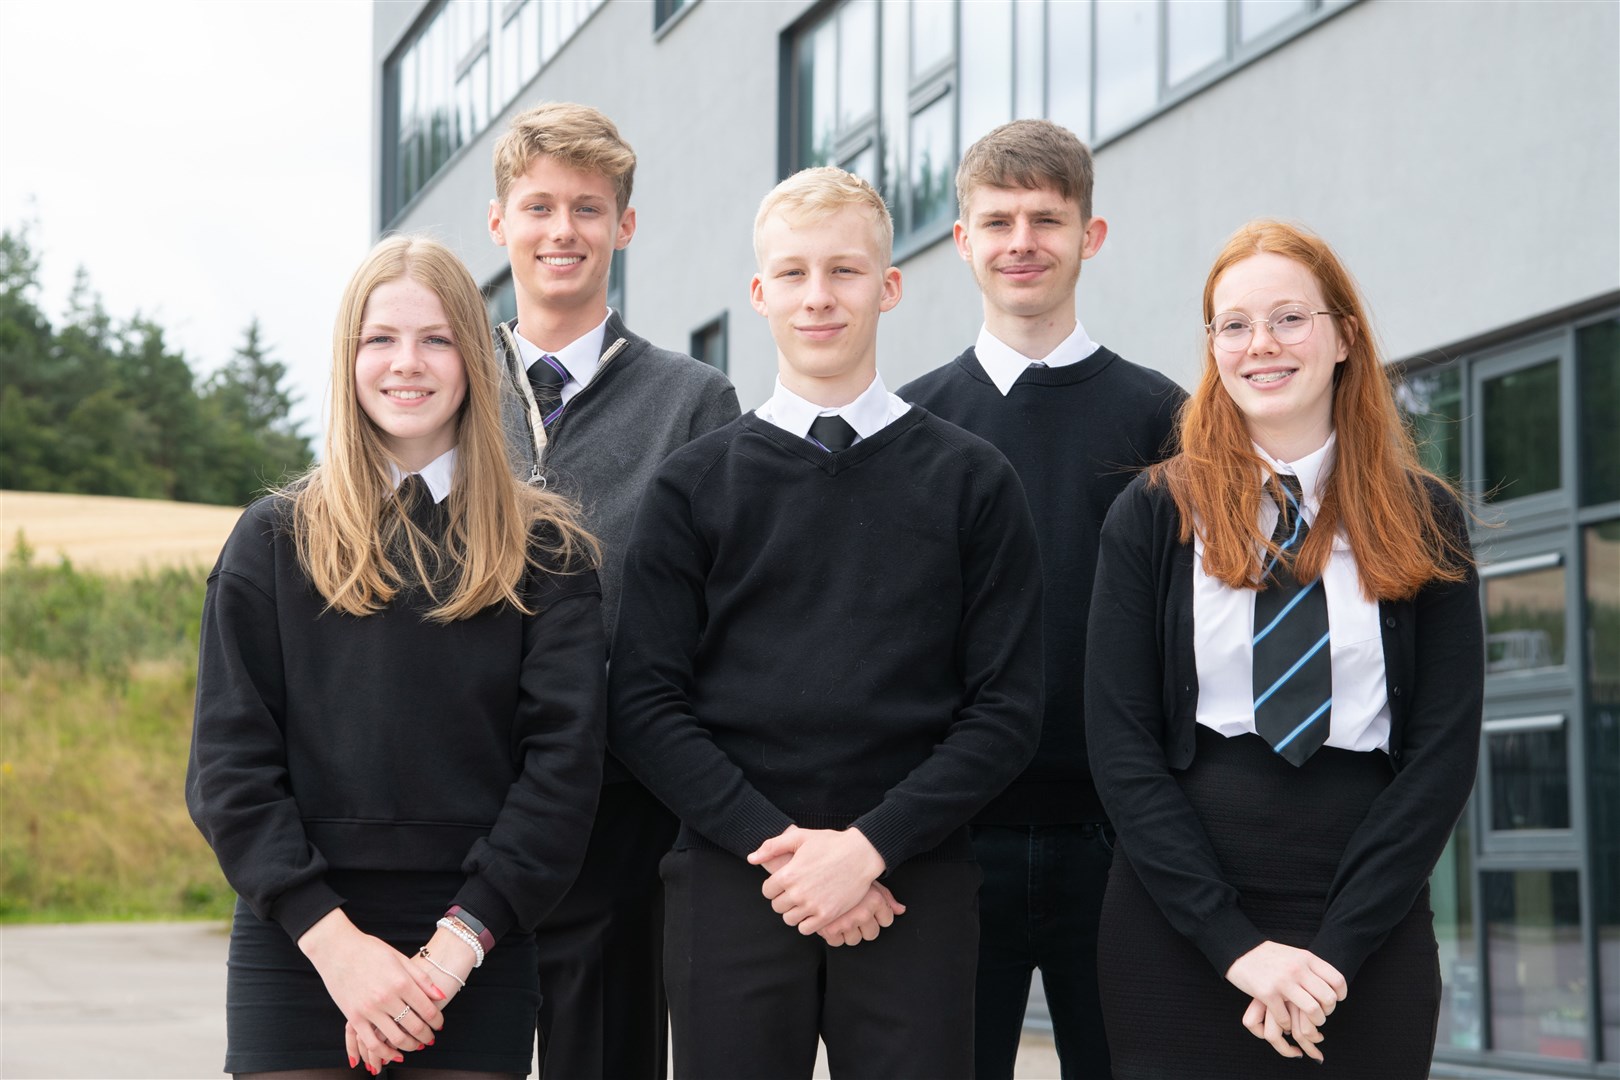 From left to right: Kathryn Petrie, Alfie Harper, Zack Crowley Kenzie Stephen and Darcey Taylor. Picture: Daniel Forsyth